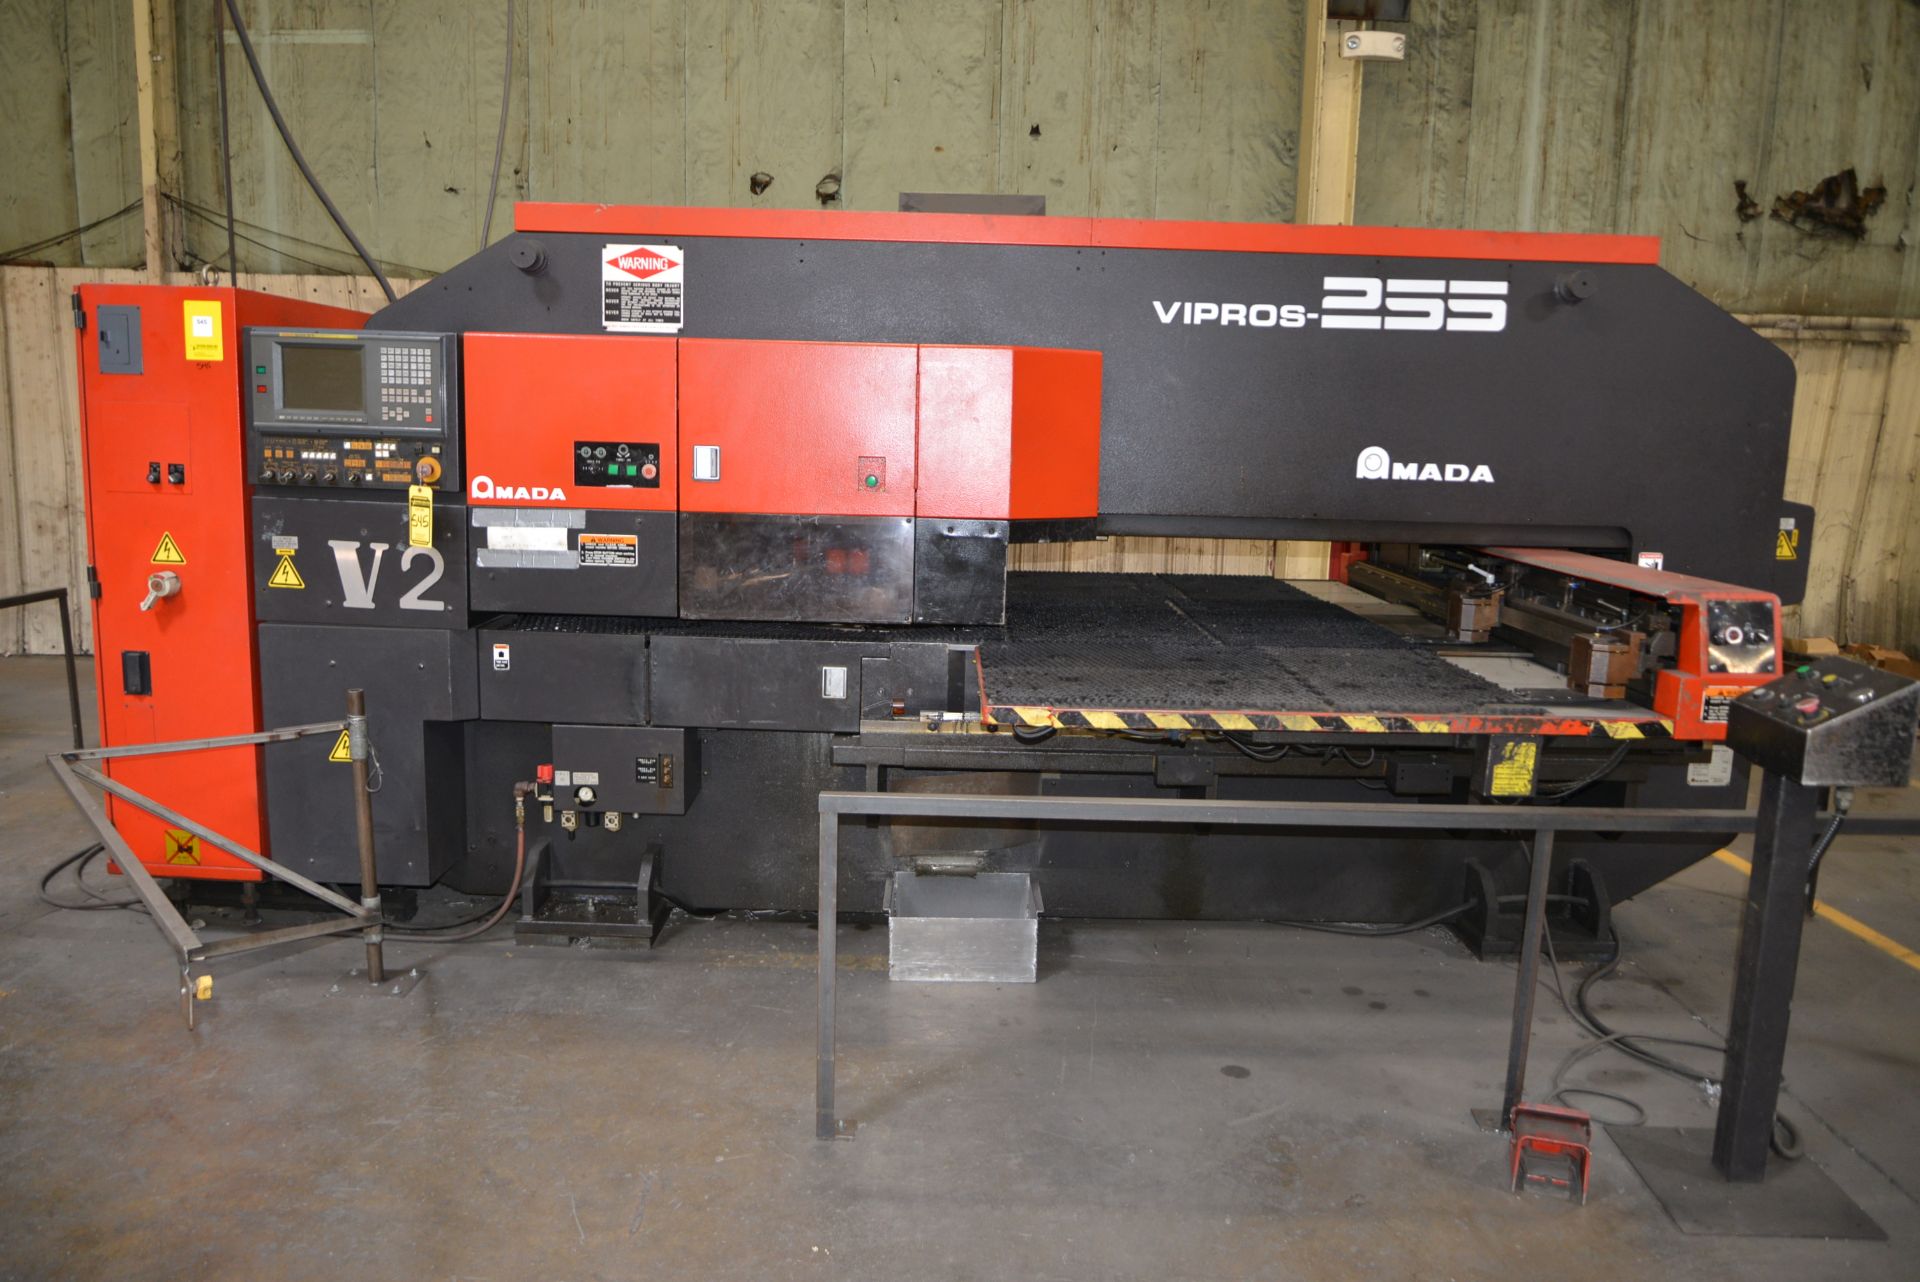 1997 AMADA VIPROS 255 TURRET PUNCH; 20-TON CAPACITY, 31 TURRET STATIONS, POWER REQUIREMENT 22 KVA, - Image 2 of 4